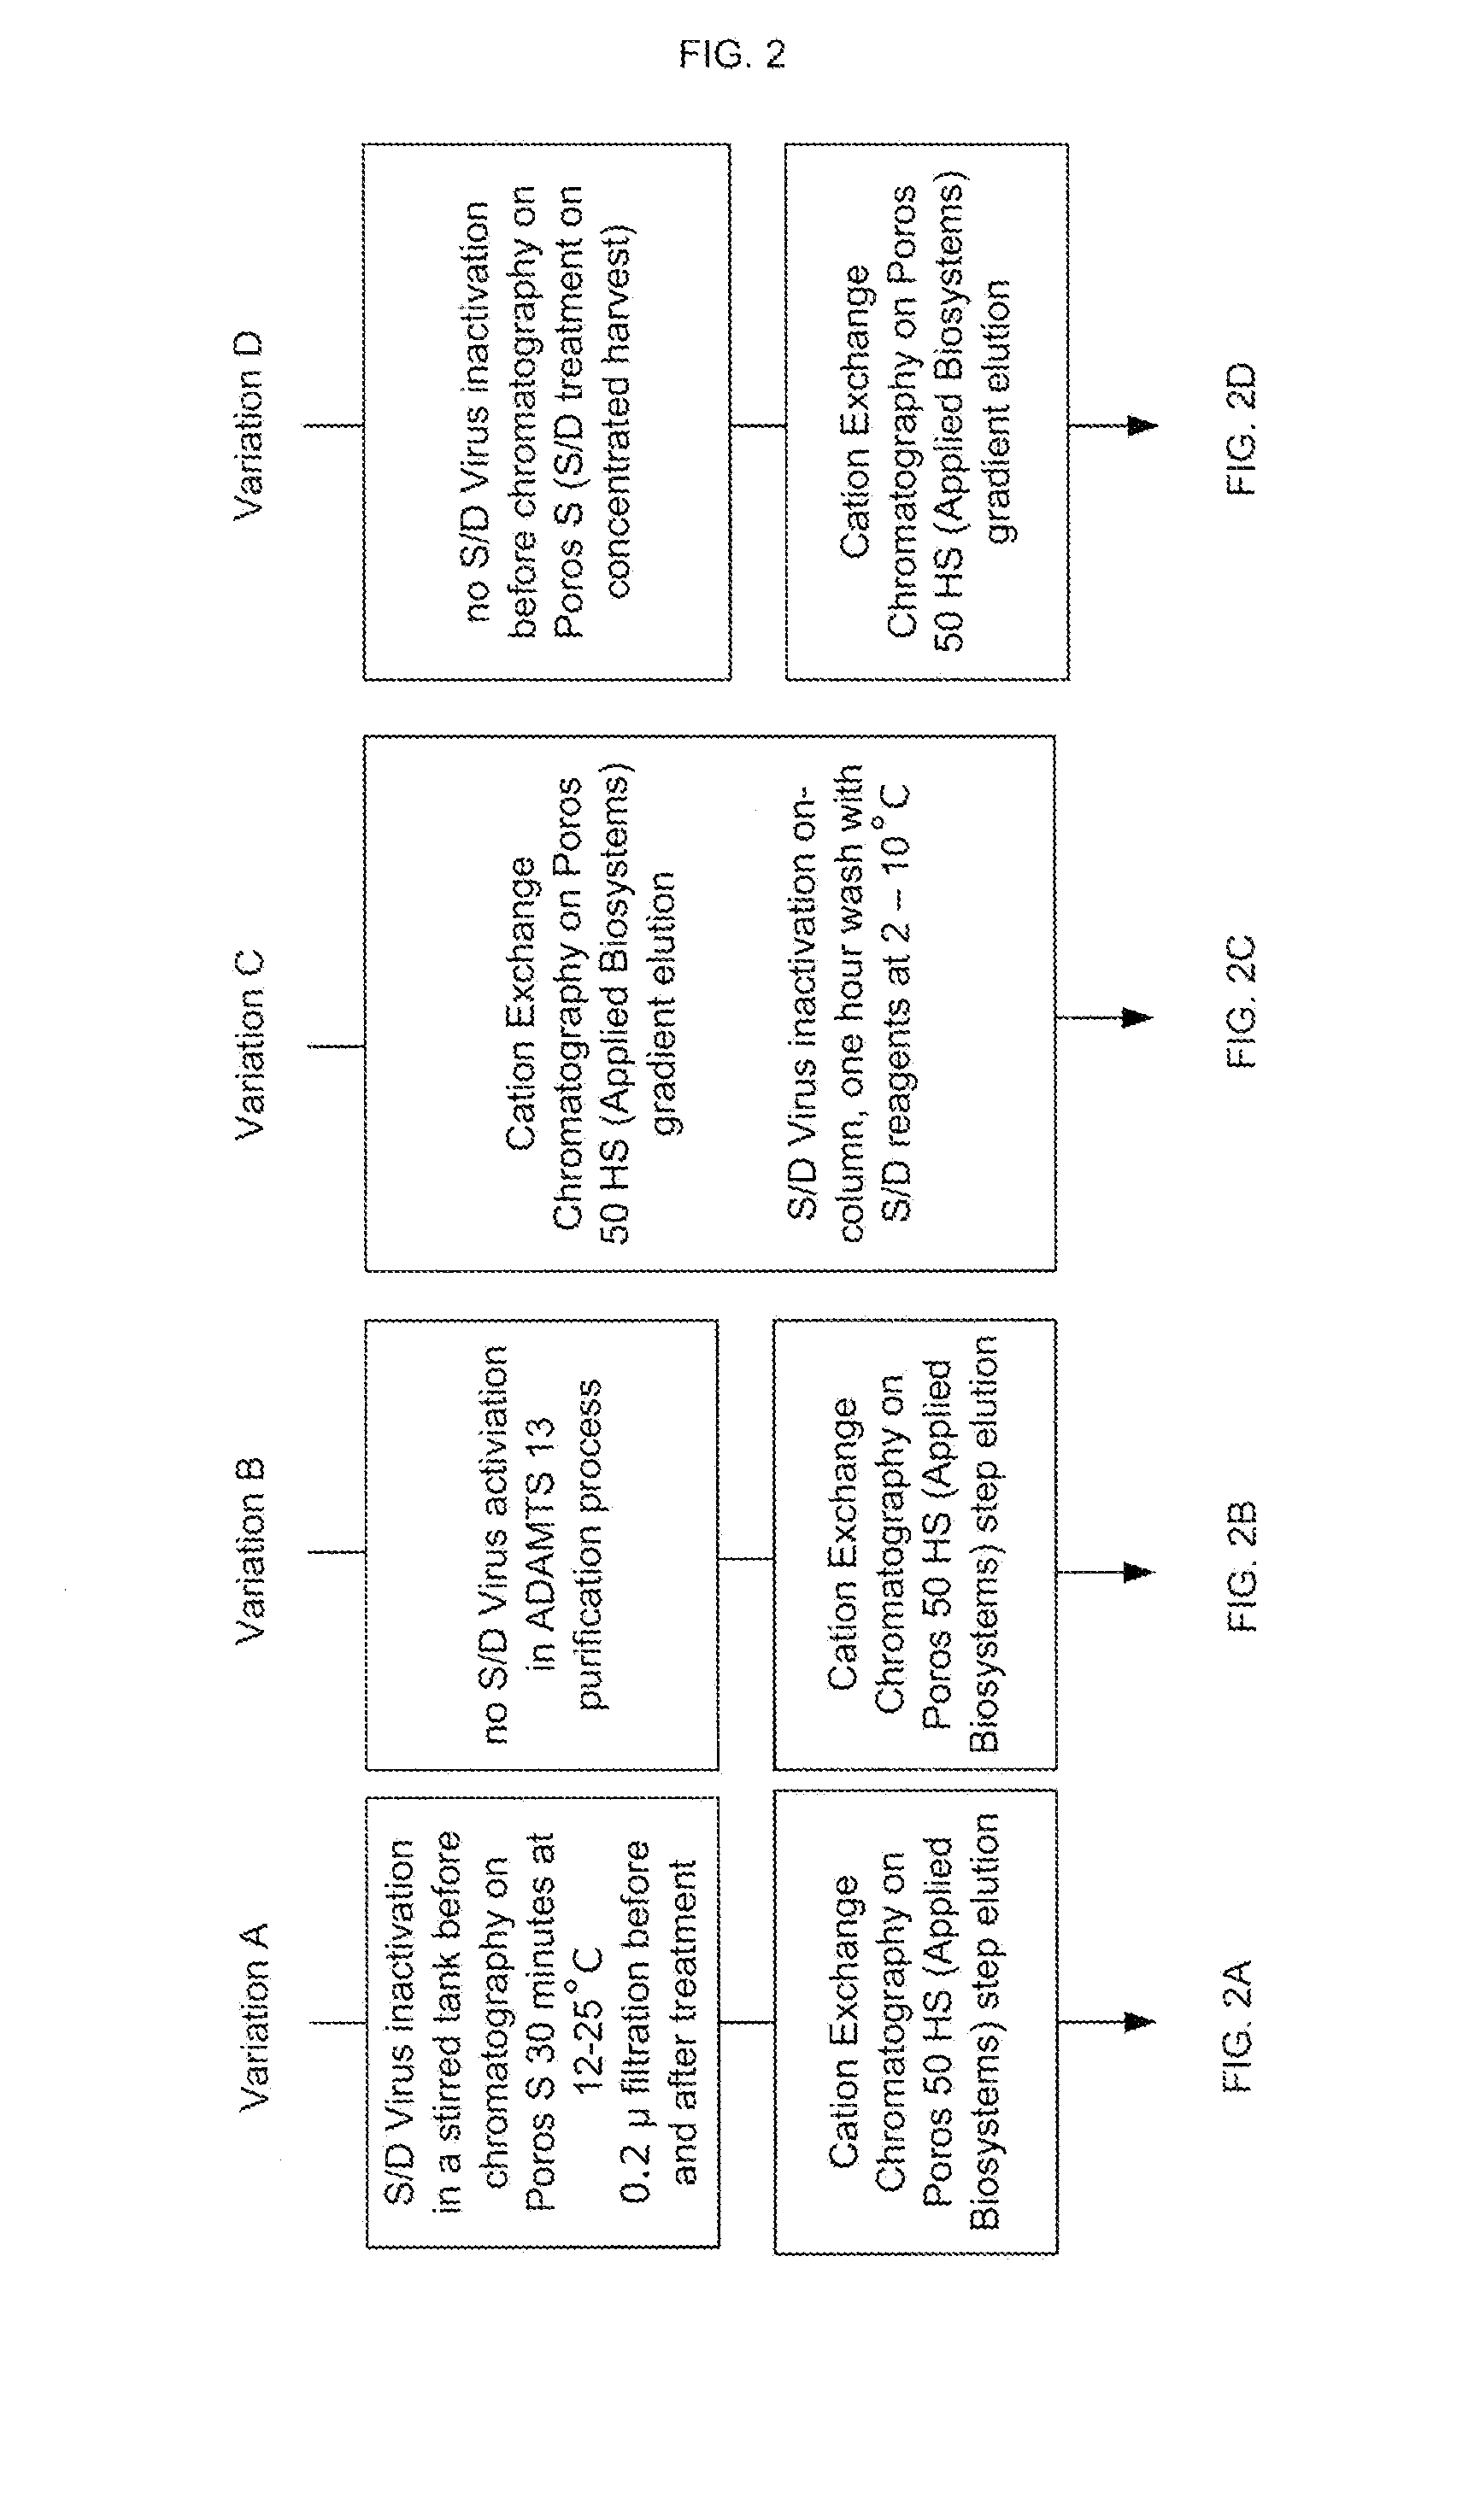 Methods of Purifying Recombinant Adamts13 and Other Proteins and Compositions Thereof